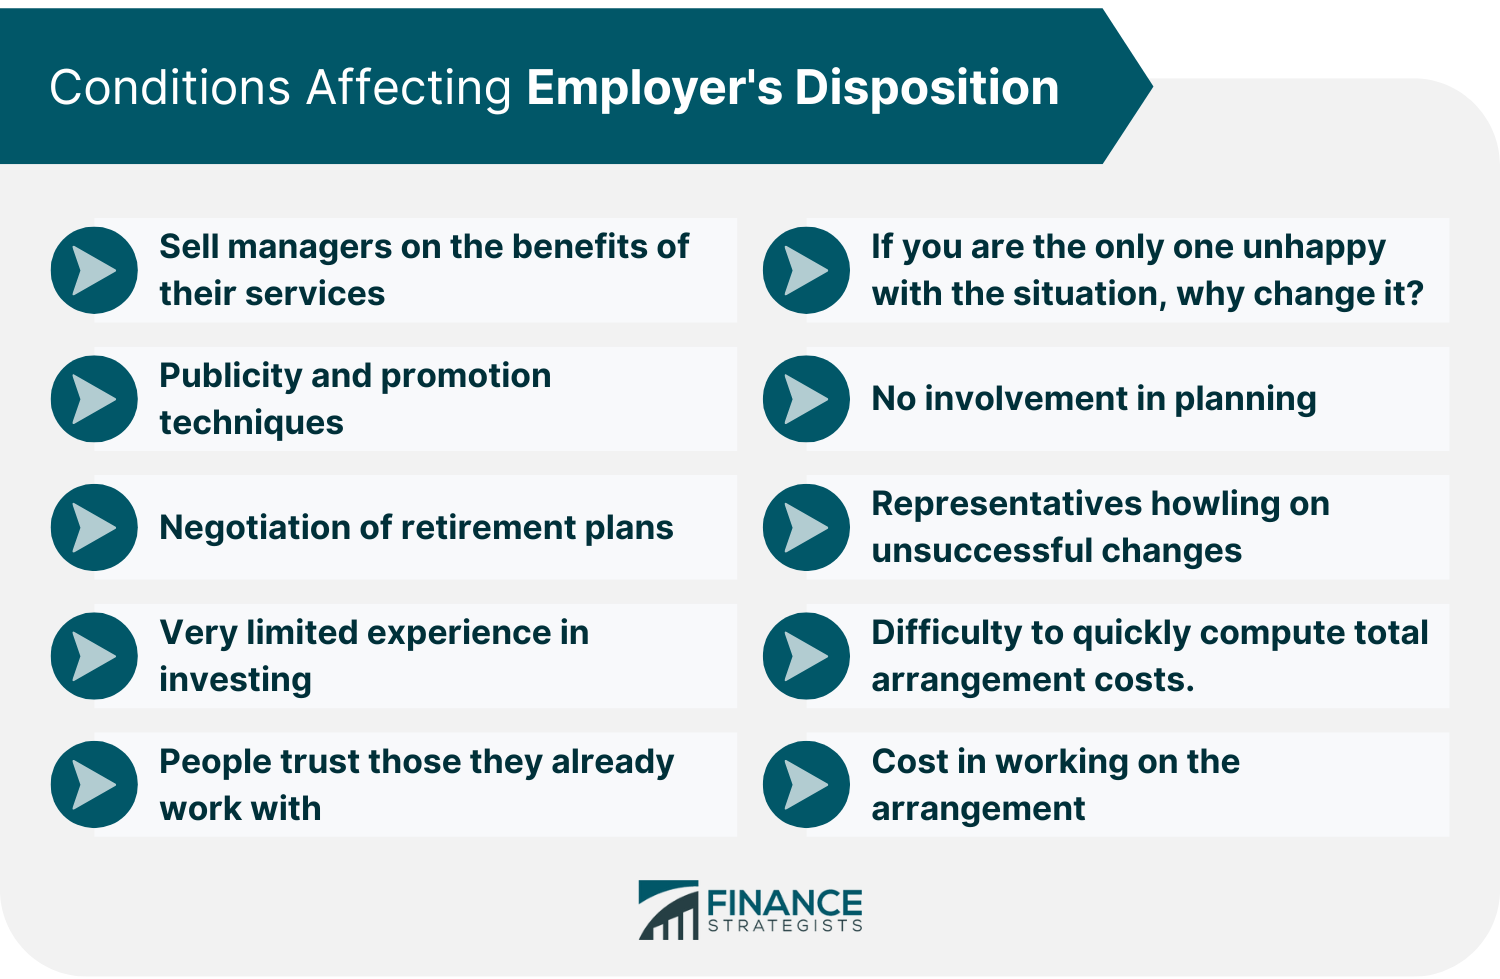 Conditions Affecting Employer's Disposition